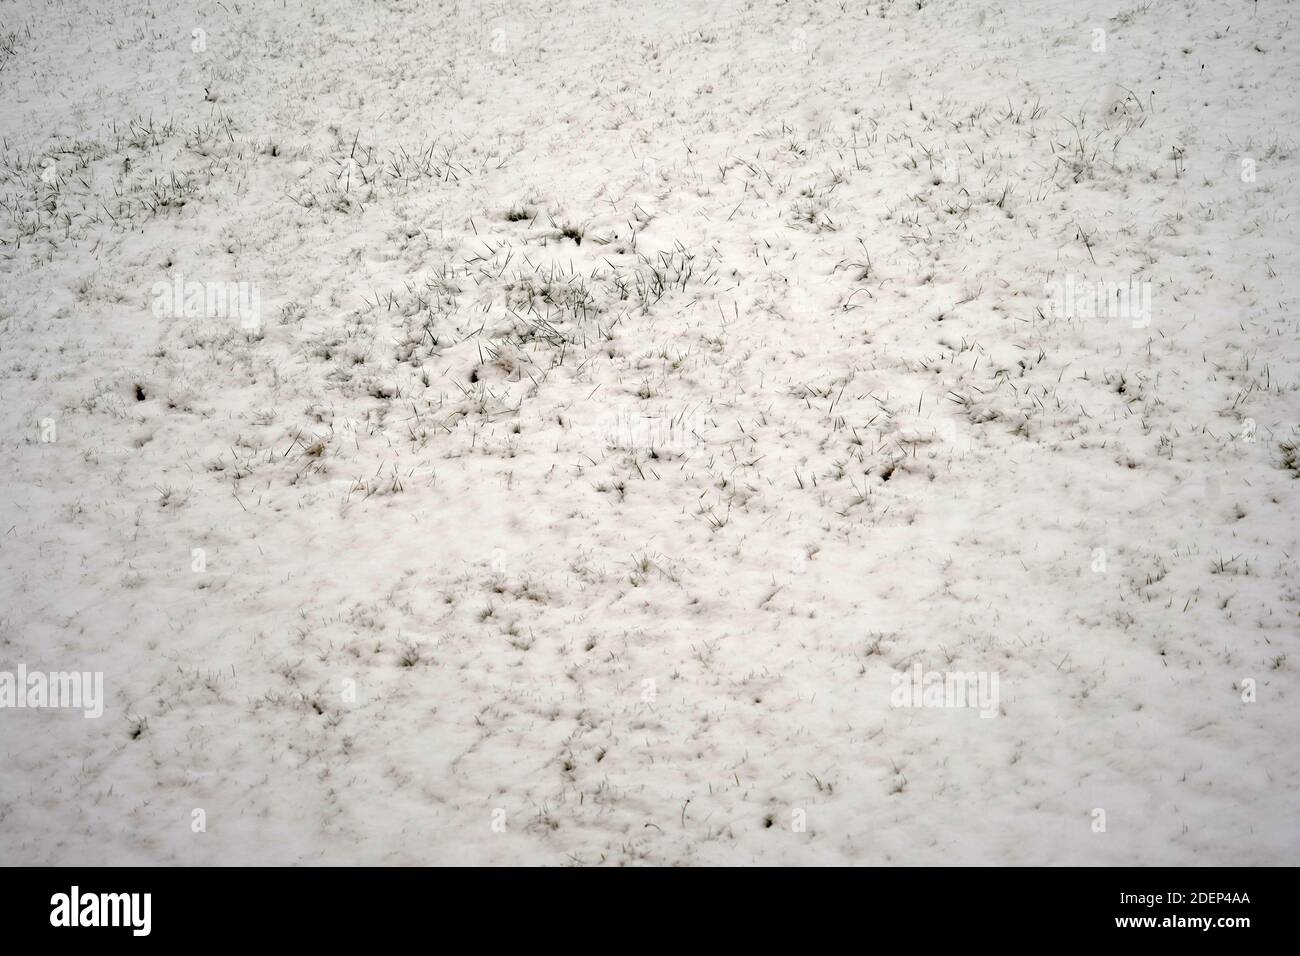 Meadow under thin layer of snow in large cutout. Most of the grass is clearly recognizable under heavy wet precipitations that will not last long. Stock Photo